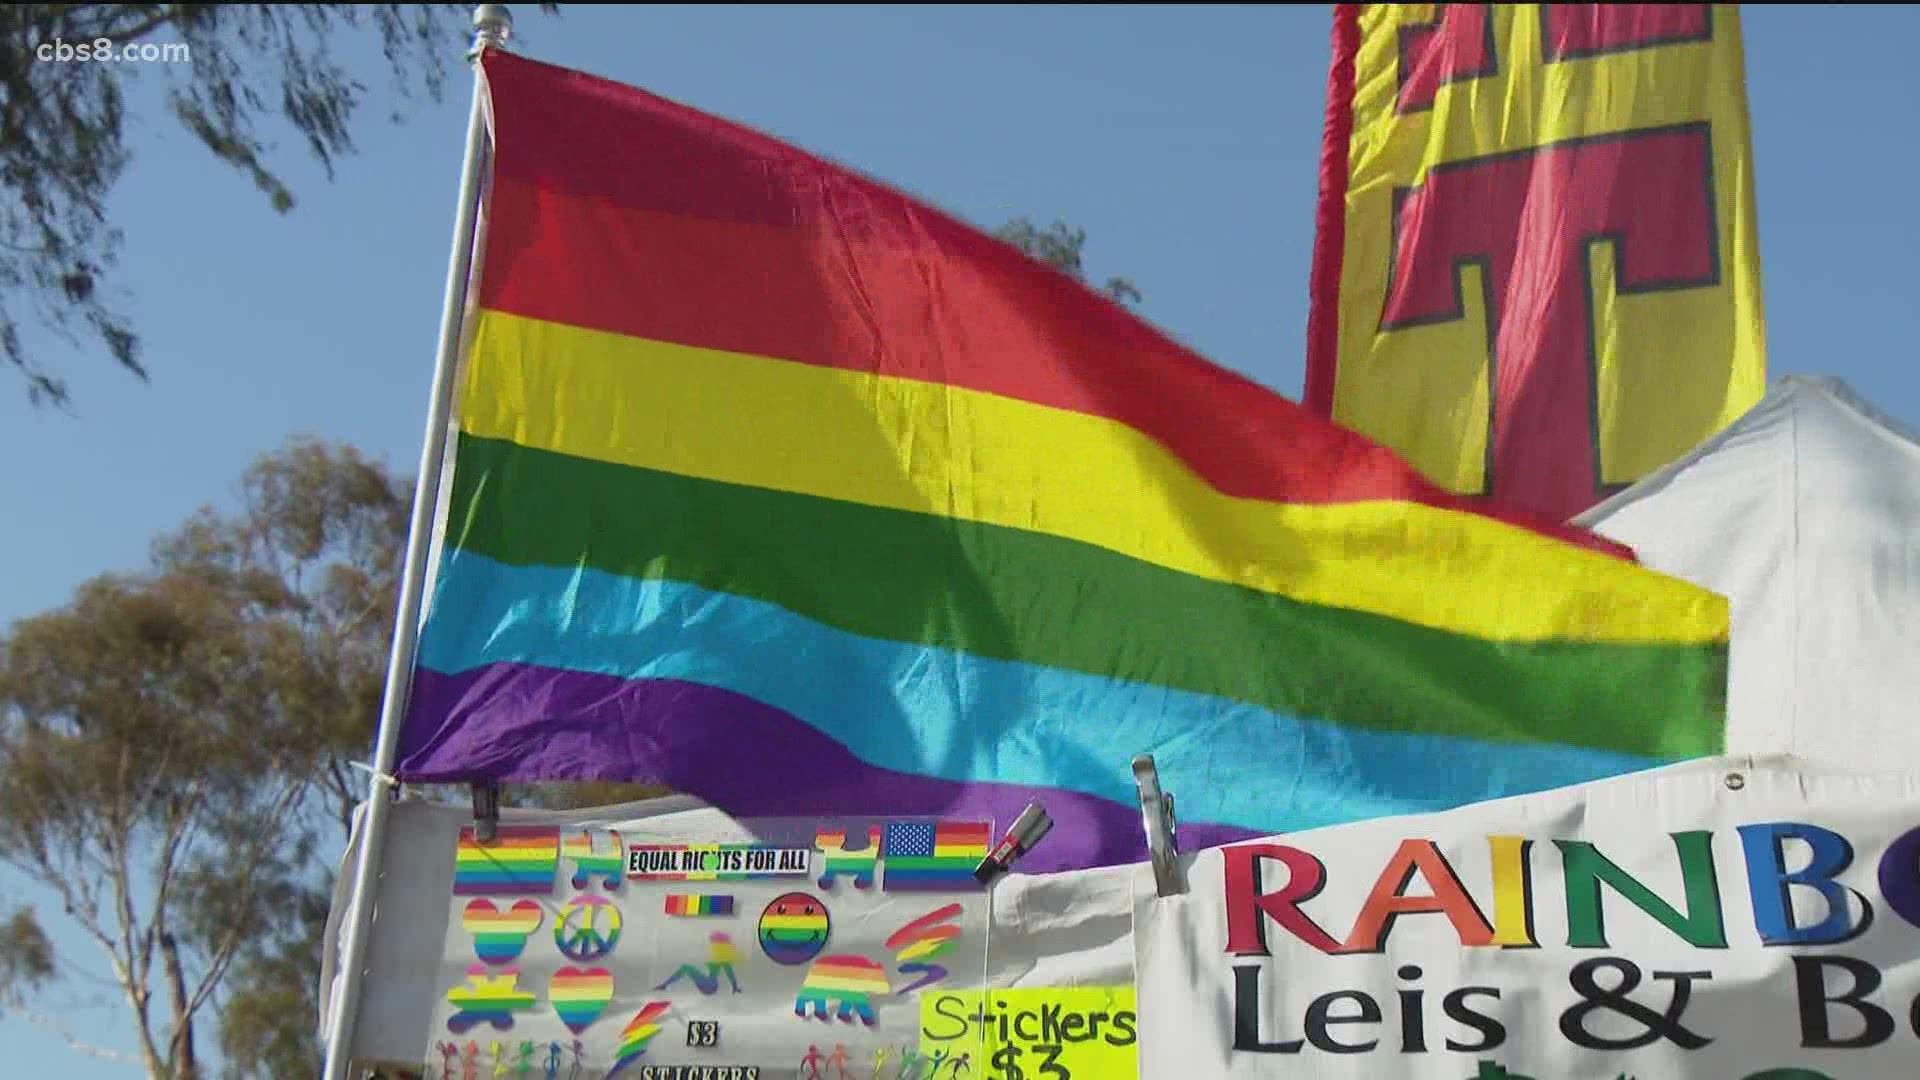 The Pride block party kicks off Pride events in San Diego this year.